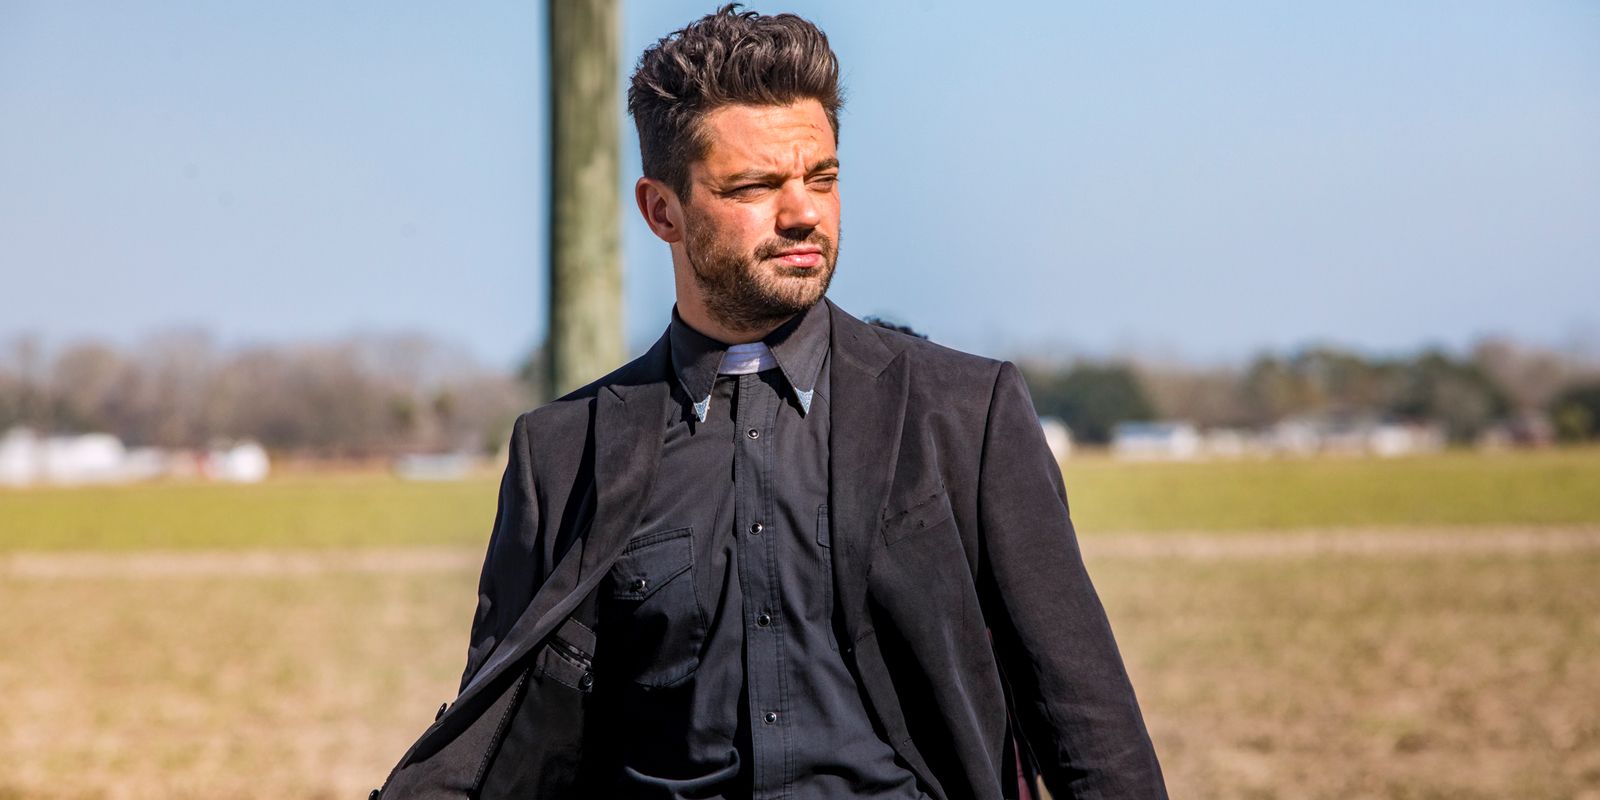 Preacher Begins an Epic and Entertaining Road Trip in an Improved Season 2